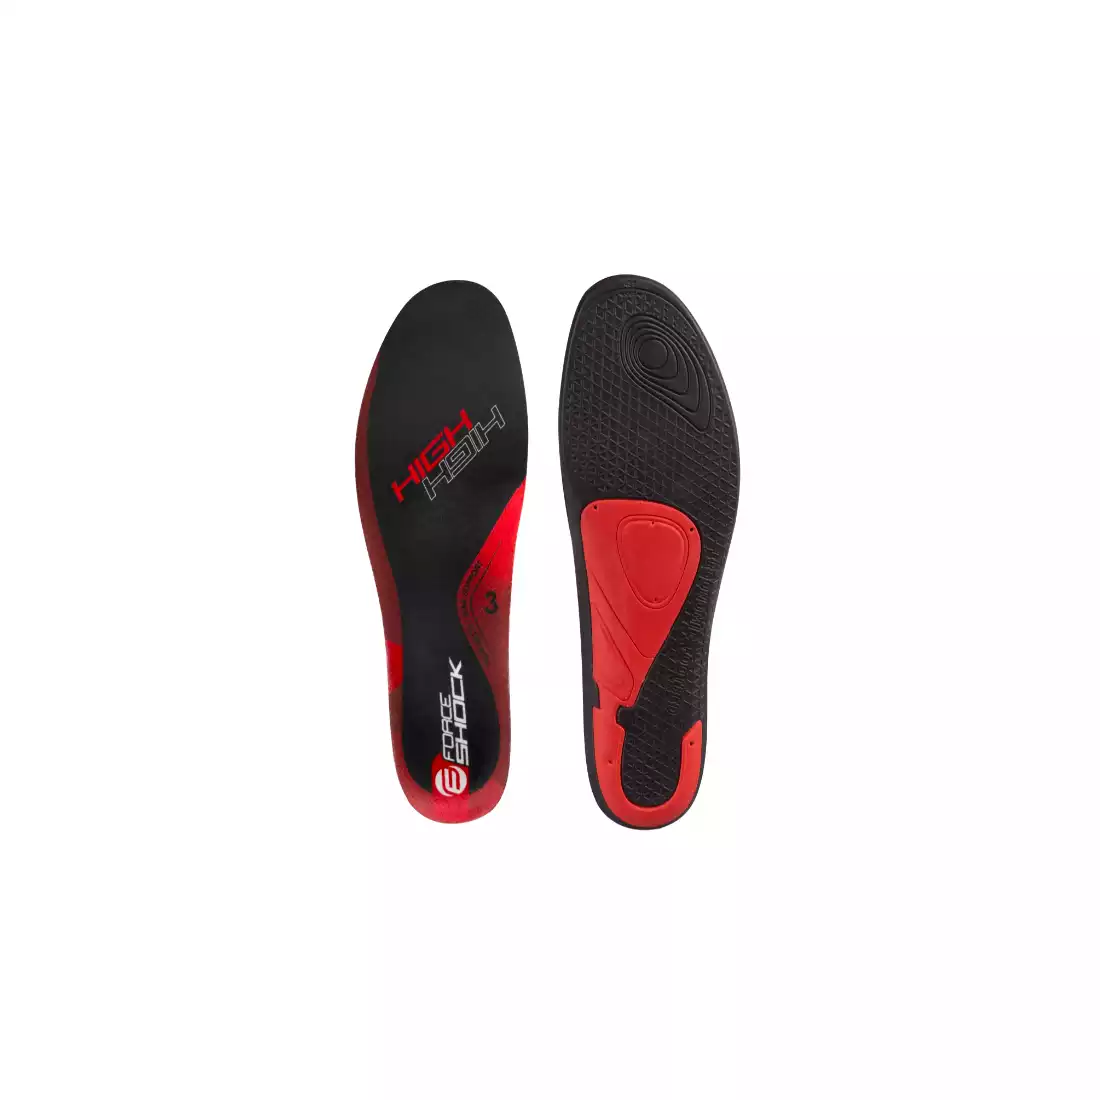 FORCE SHOCK LOW inserts for shoes black and red